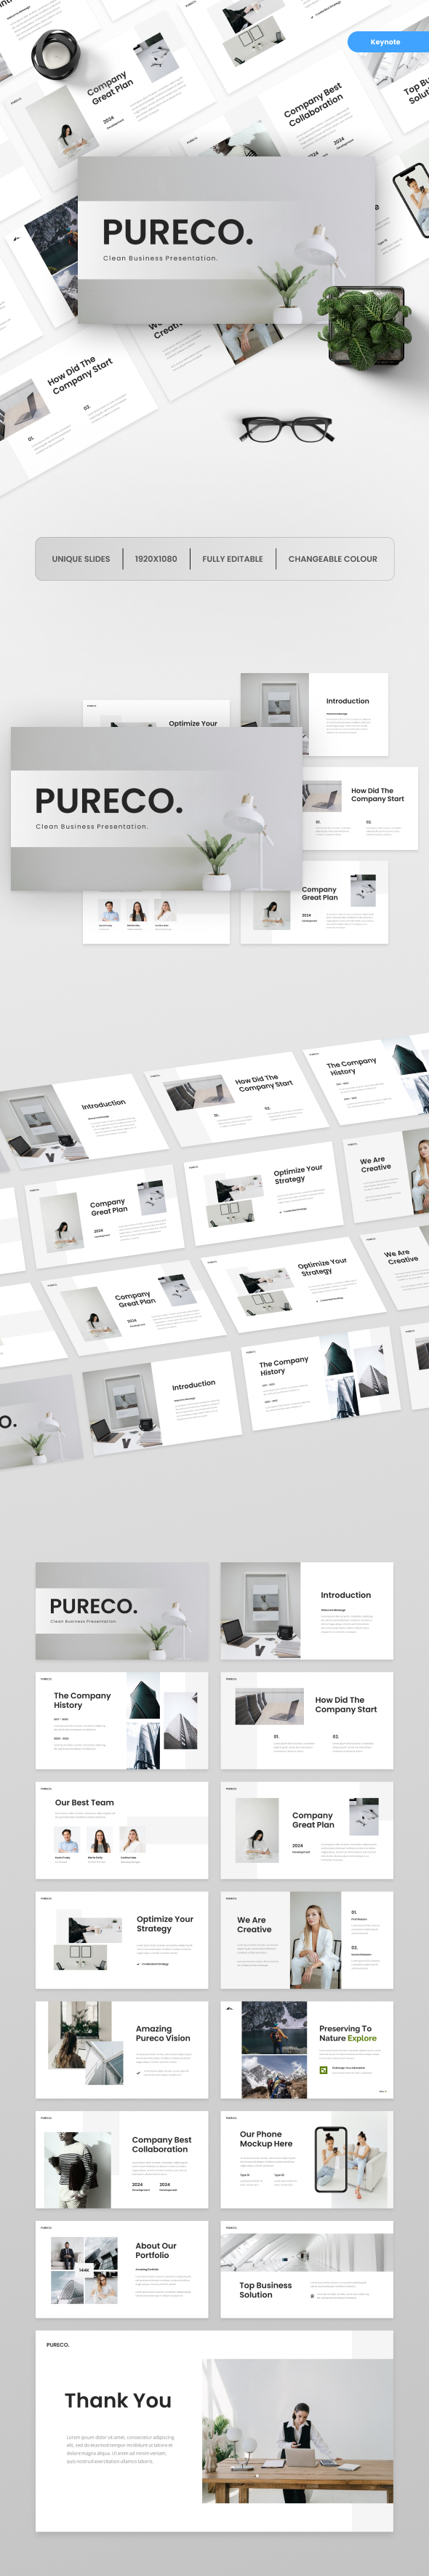 Pureco - Business Clean Keynote Template